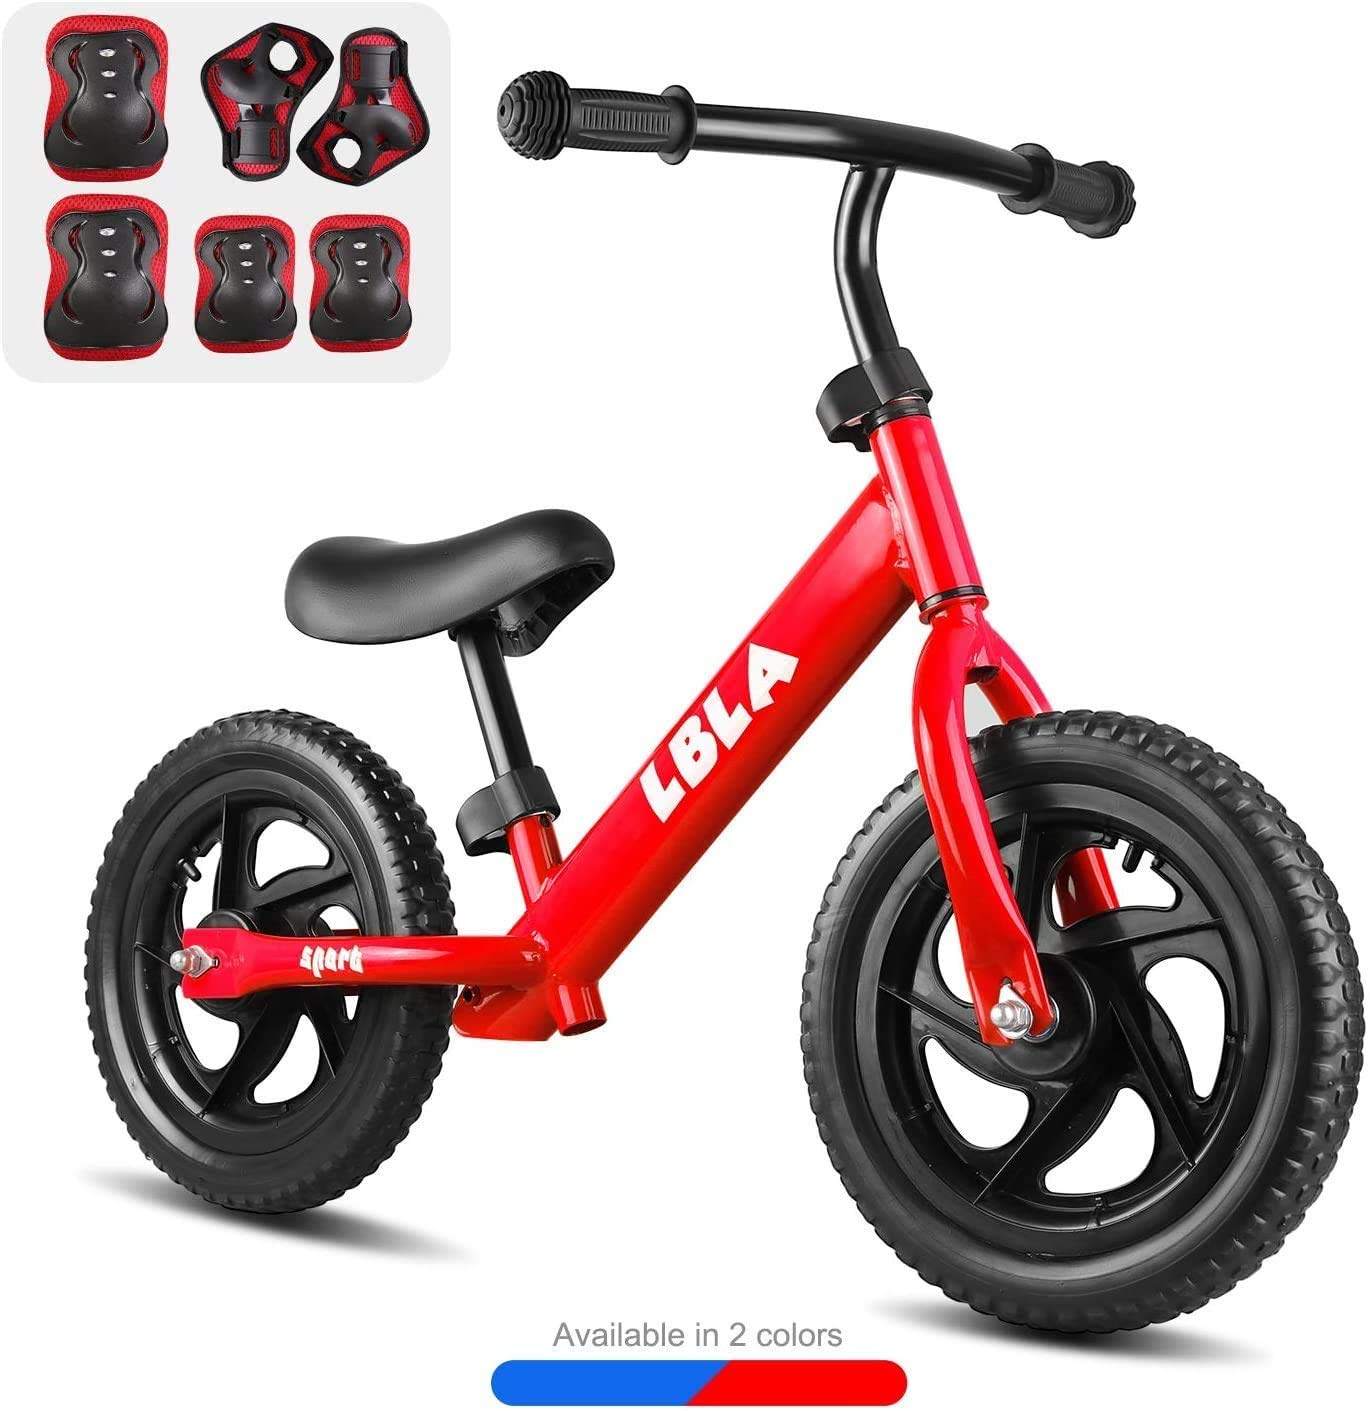 Discount Price Kids Scooter Age 4 - BeebeeRun Kids 12” Classic Sport Balance Bike with Protective Gear, Age 2 to 6 Year Old Boys Girls, No Pedal Sport Training Bicycle – Ealing